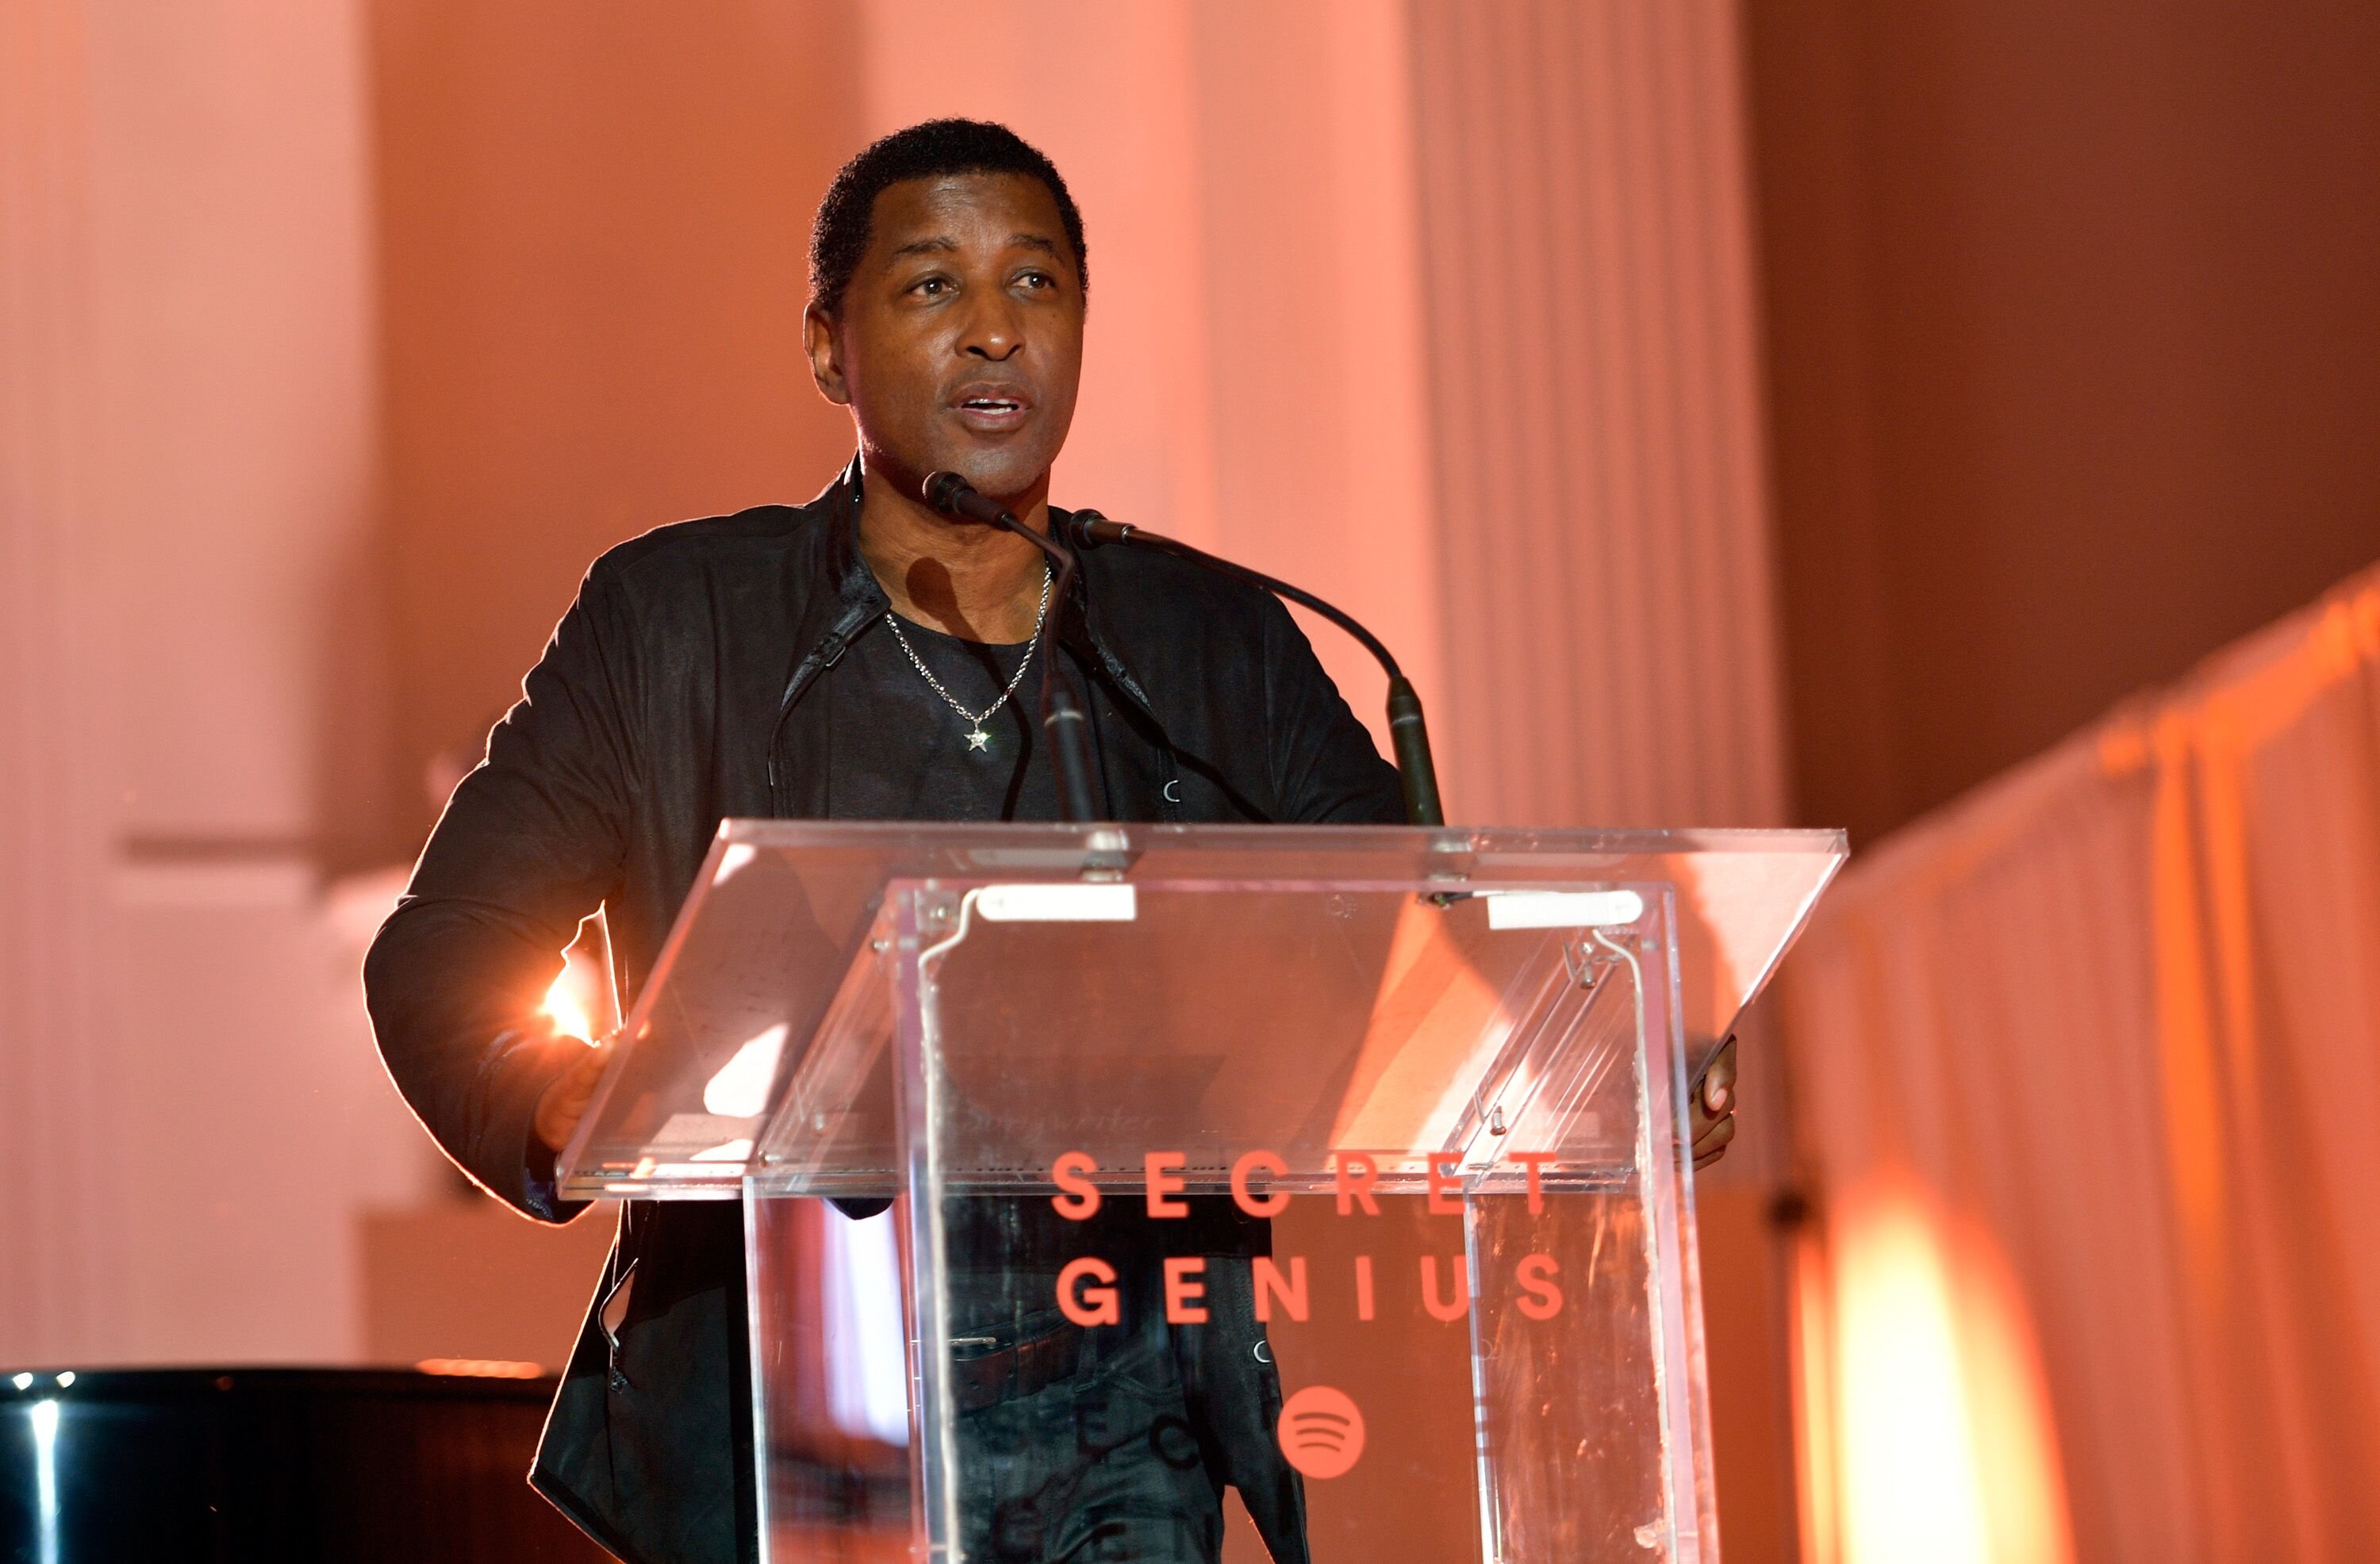  Kenneth "Babyface" Edmonds at Spotify's Inaugural Secret Genius Awards in Los Angeles in 2017 | Source: Getty Images